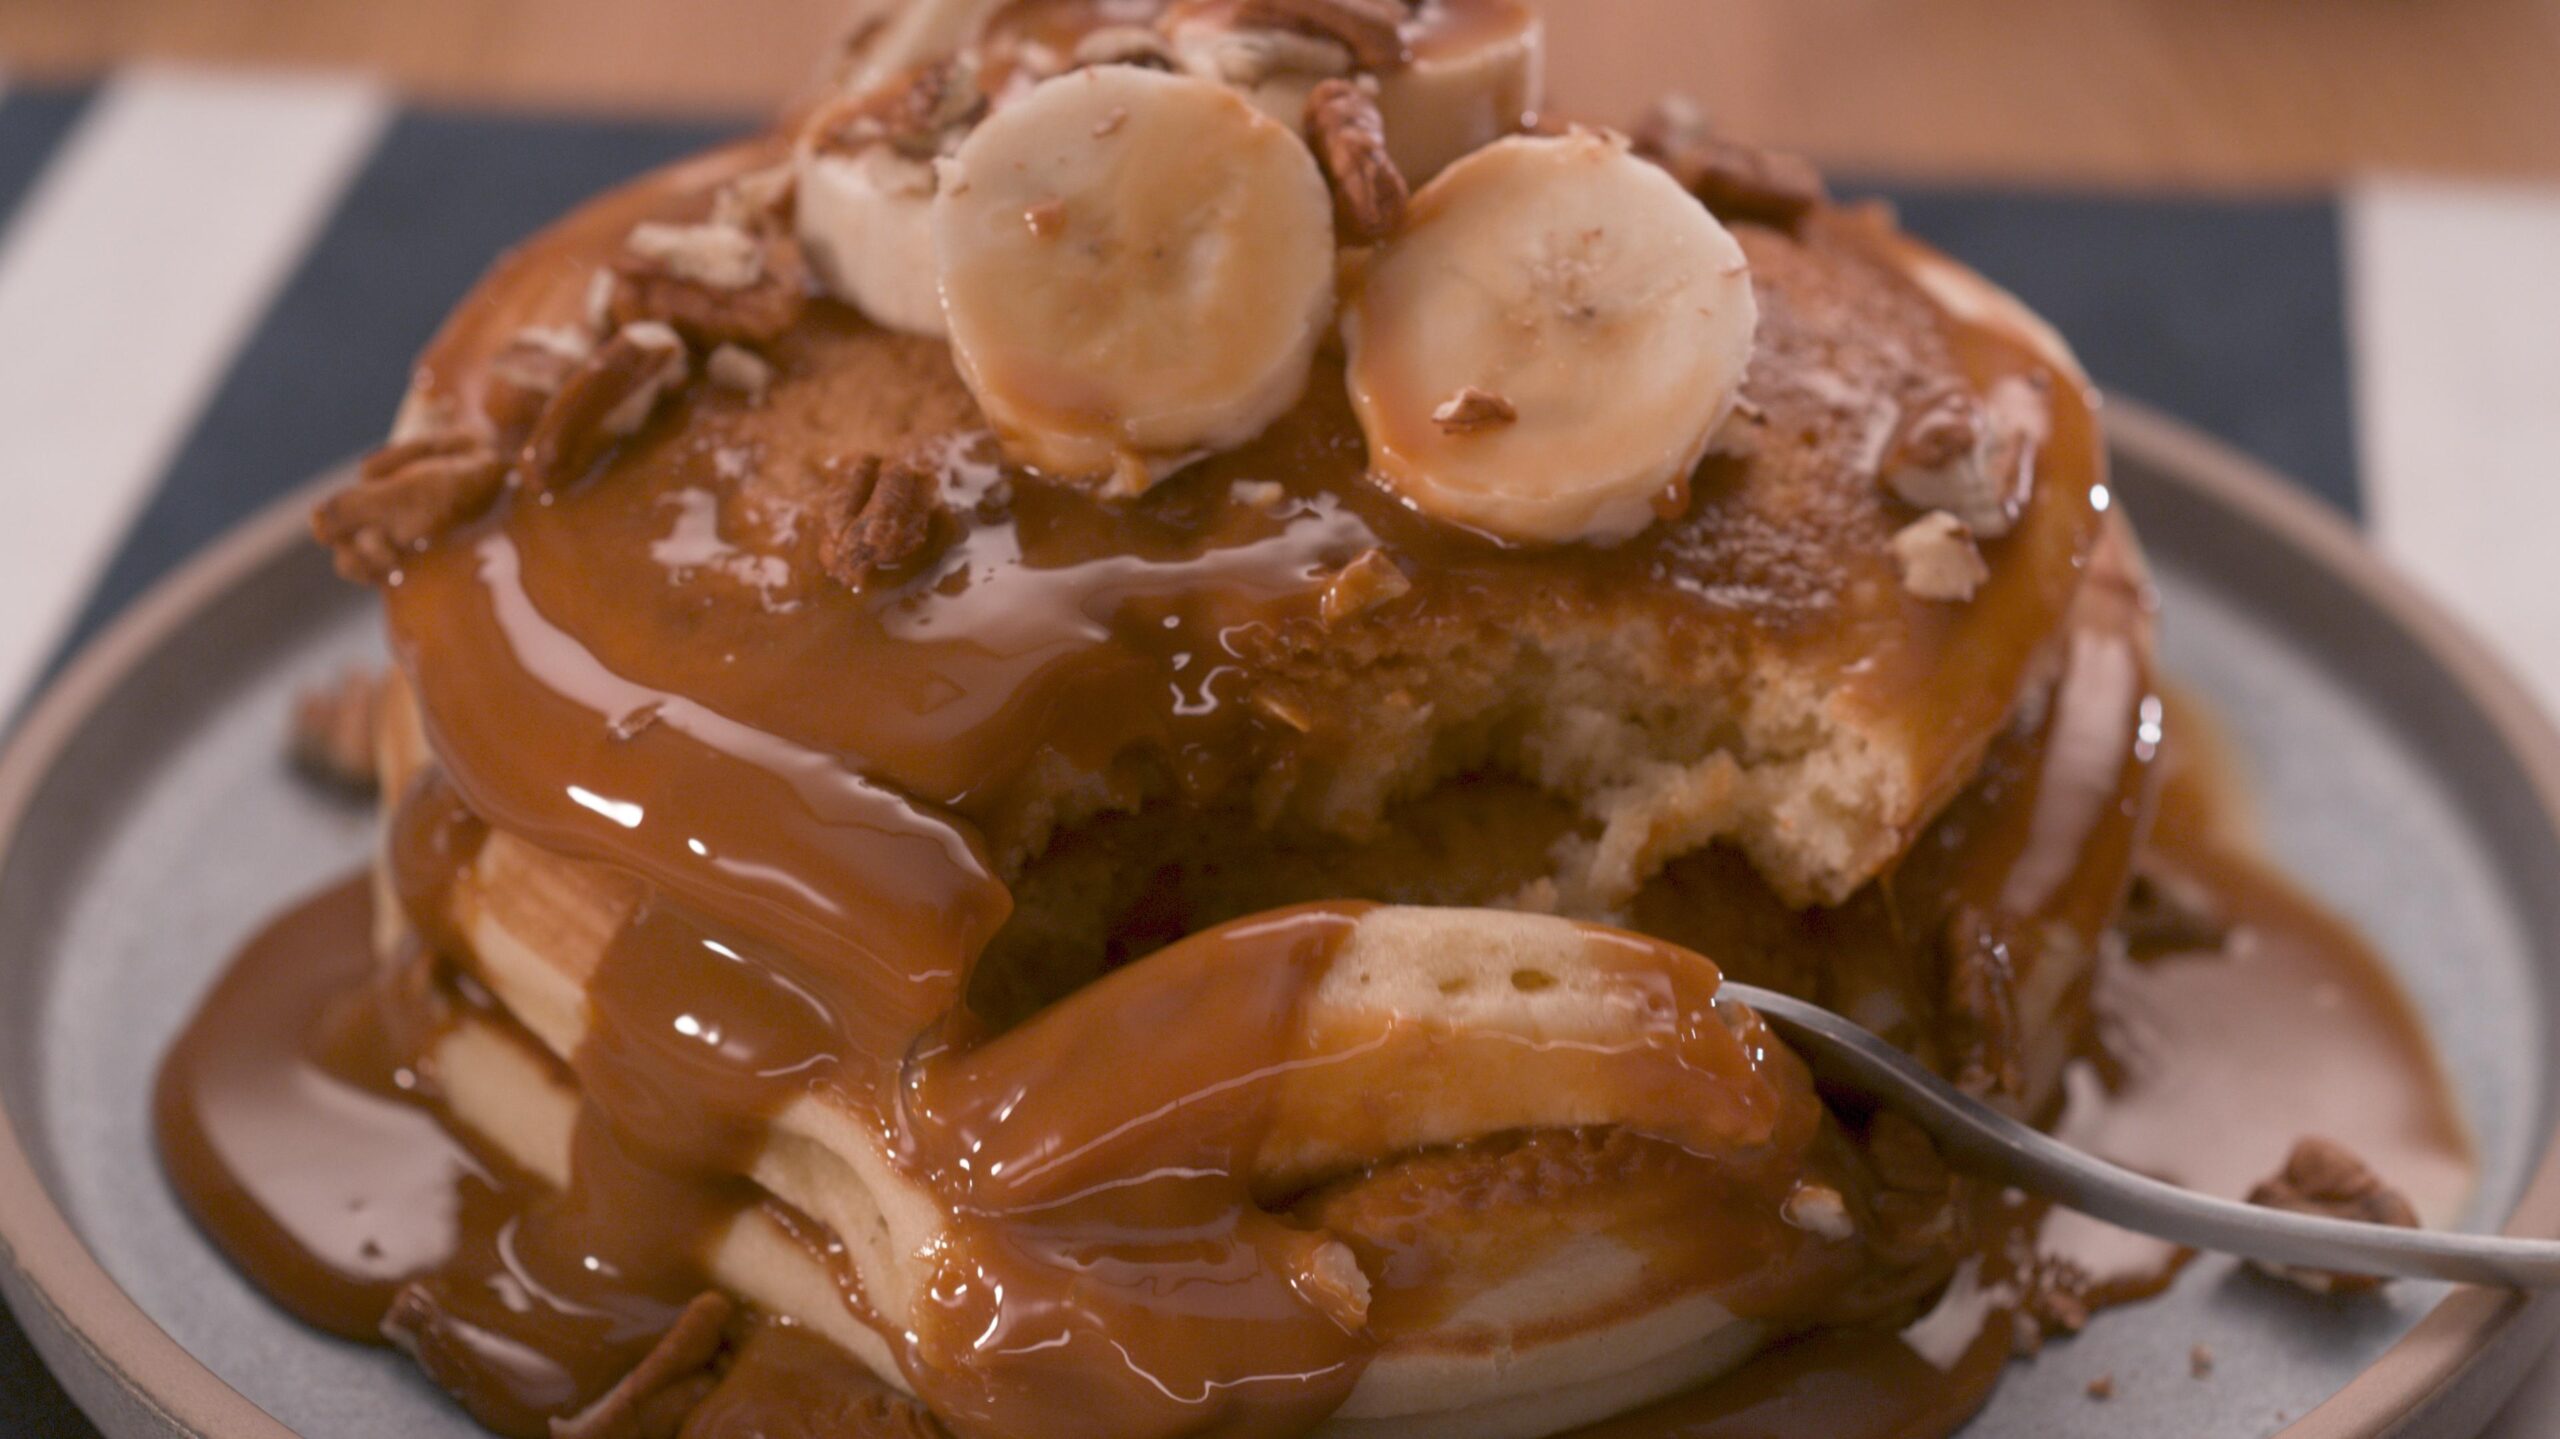  Let's upgrade your Saturday morning pancake game with Dulce de Leche